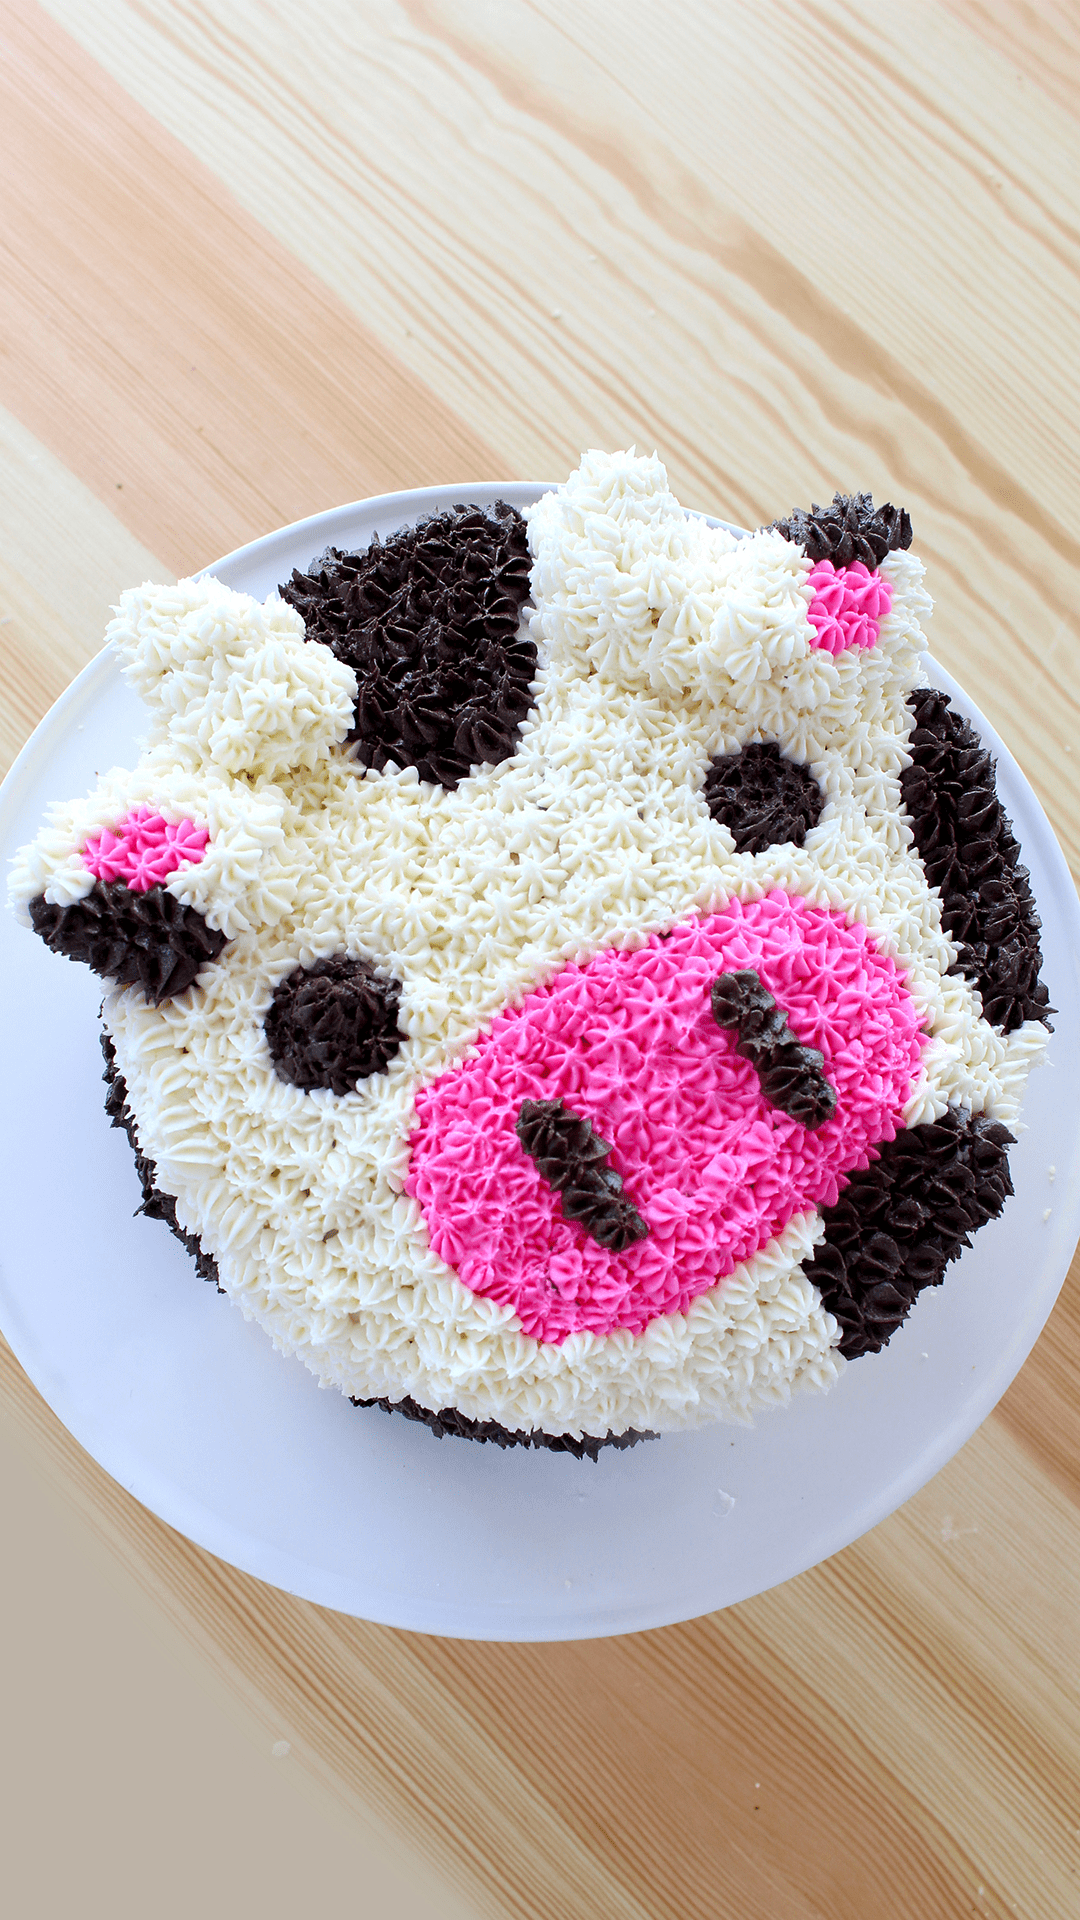 Lily Cakes - Highland cow birthday cake! | Facebook